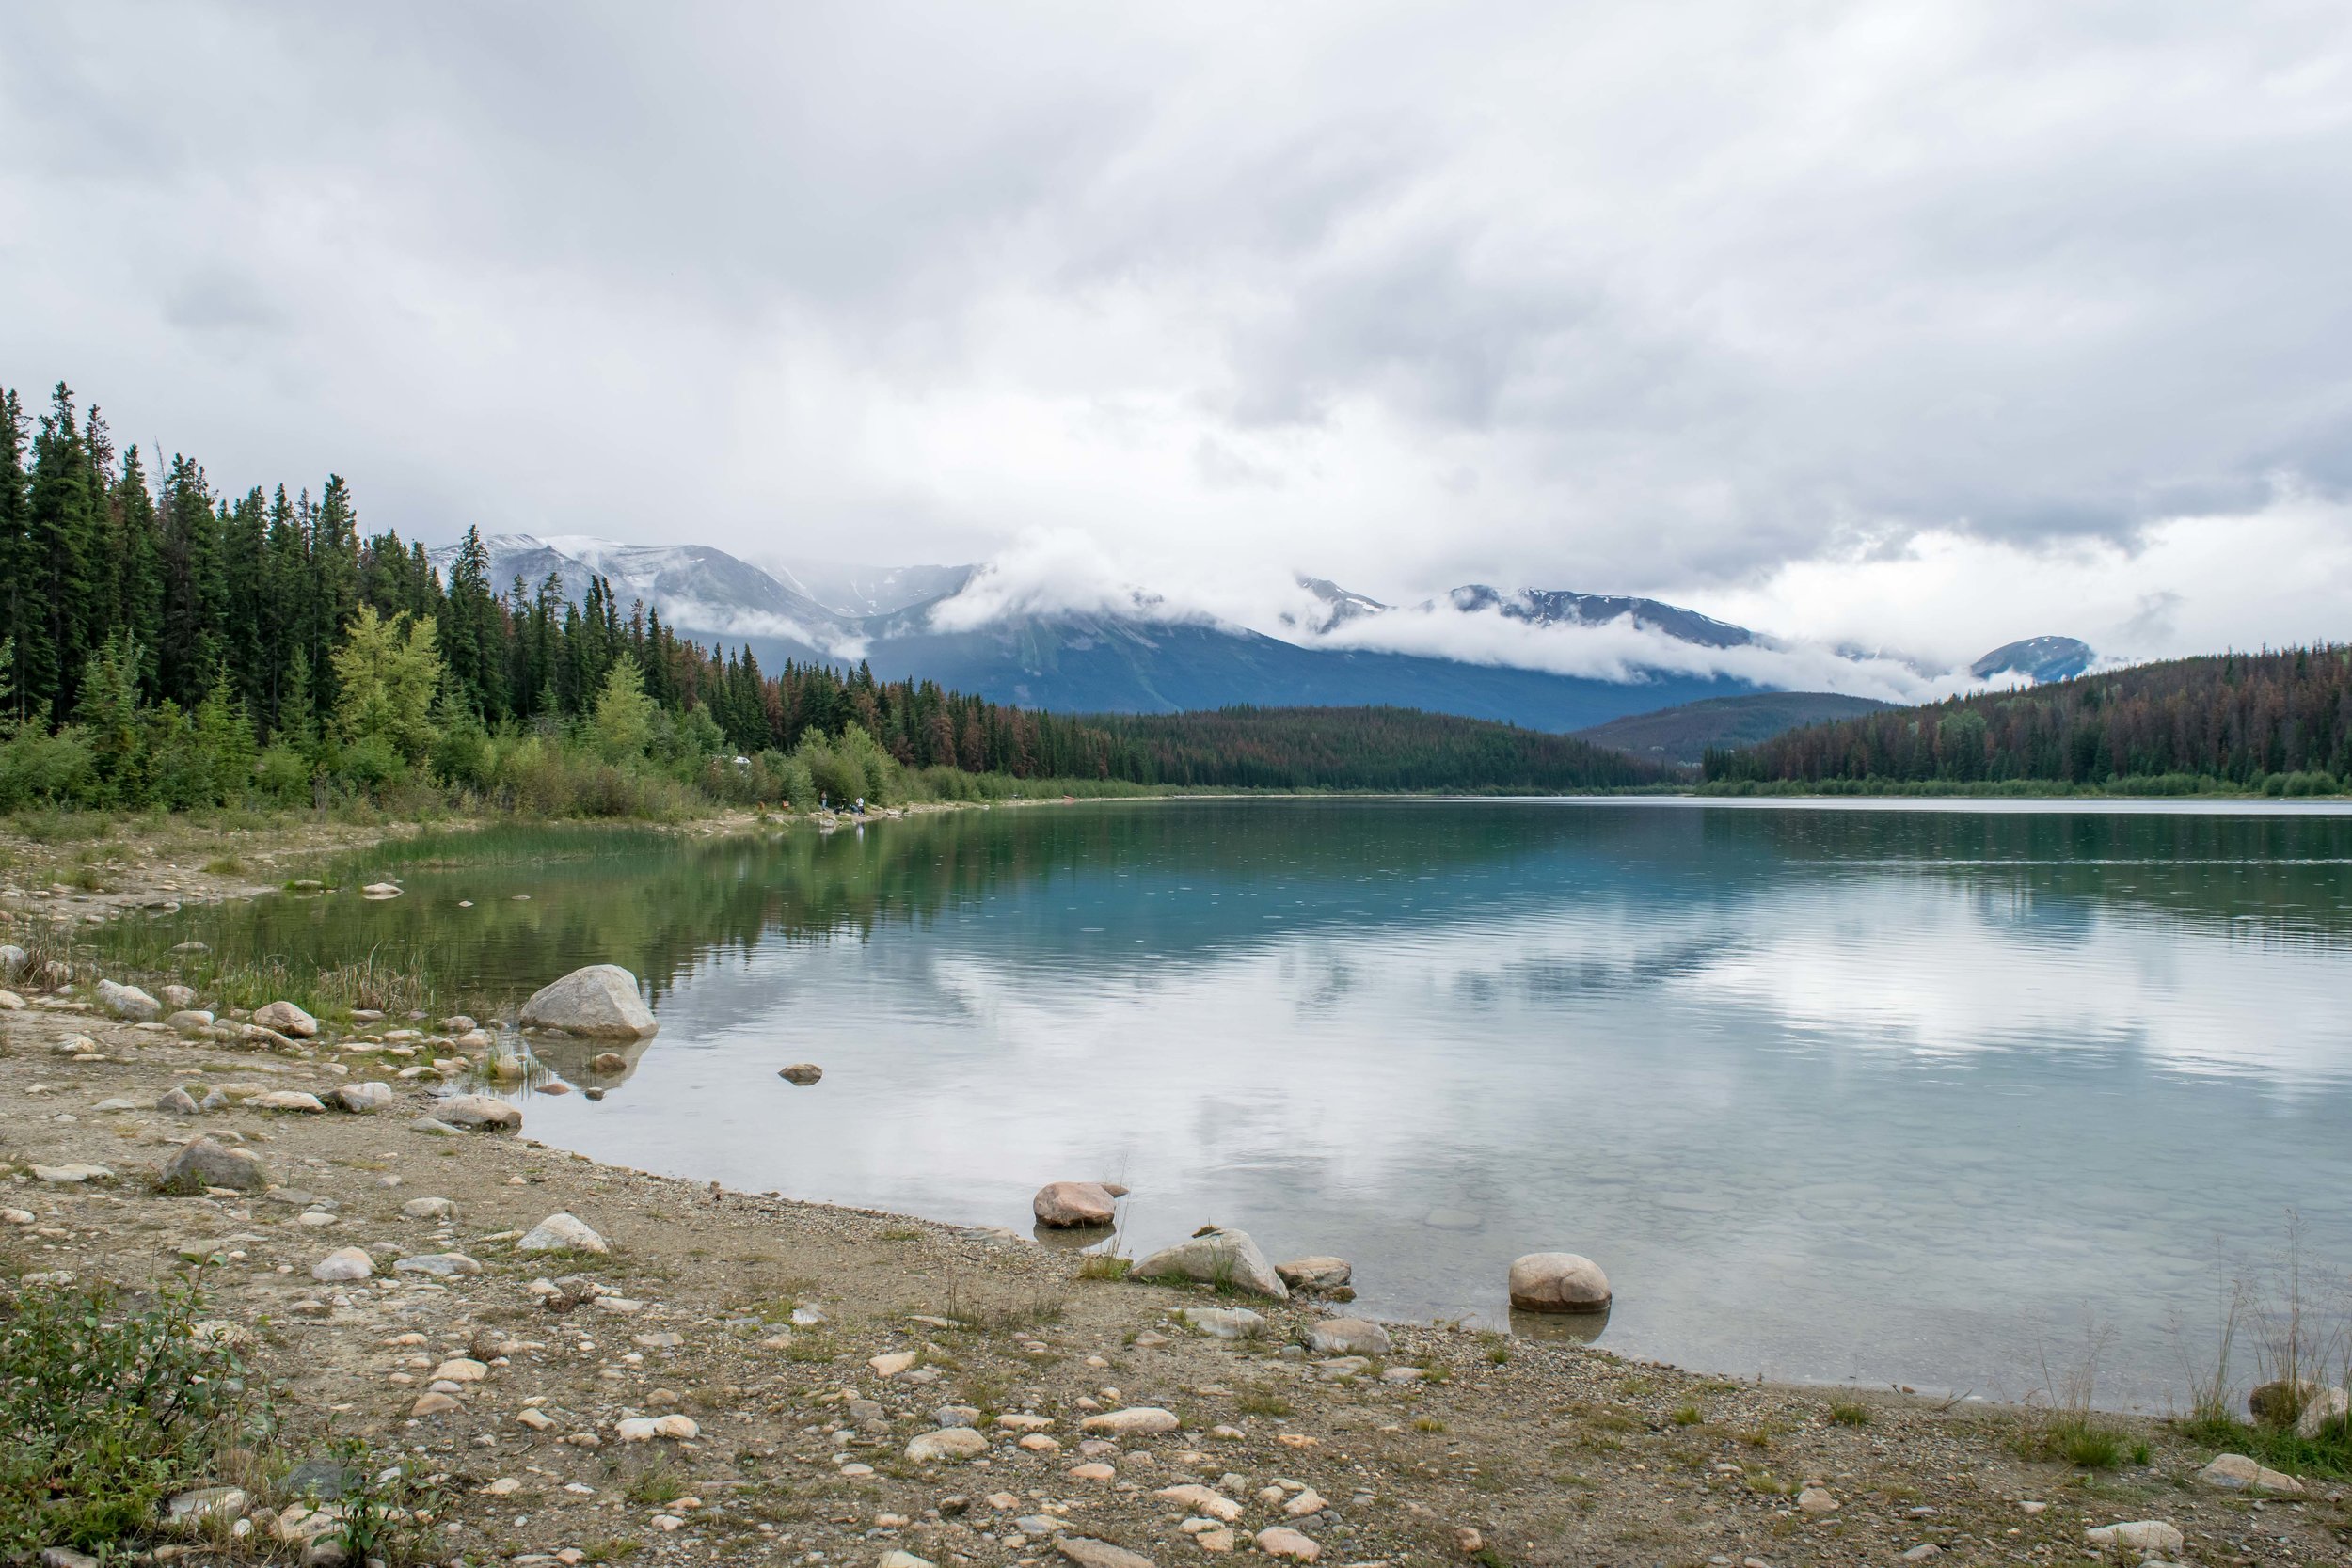 A Photo Journal of the Canadian Rockies